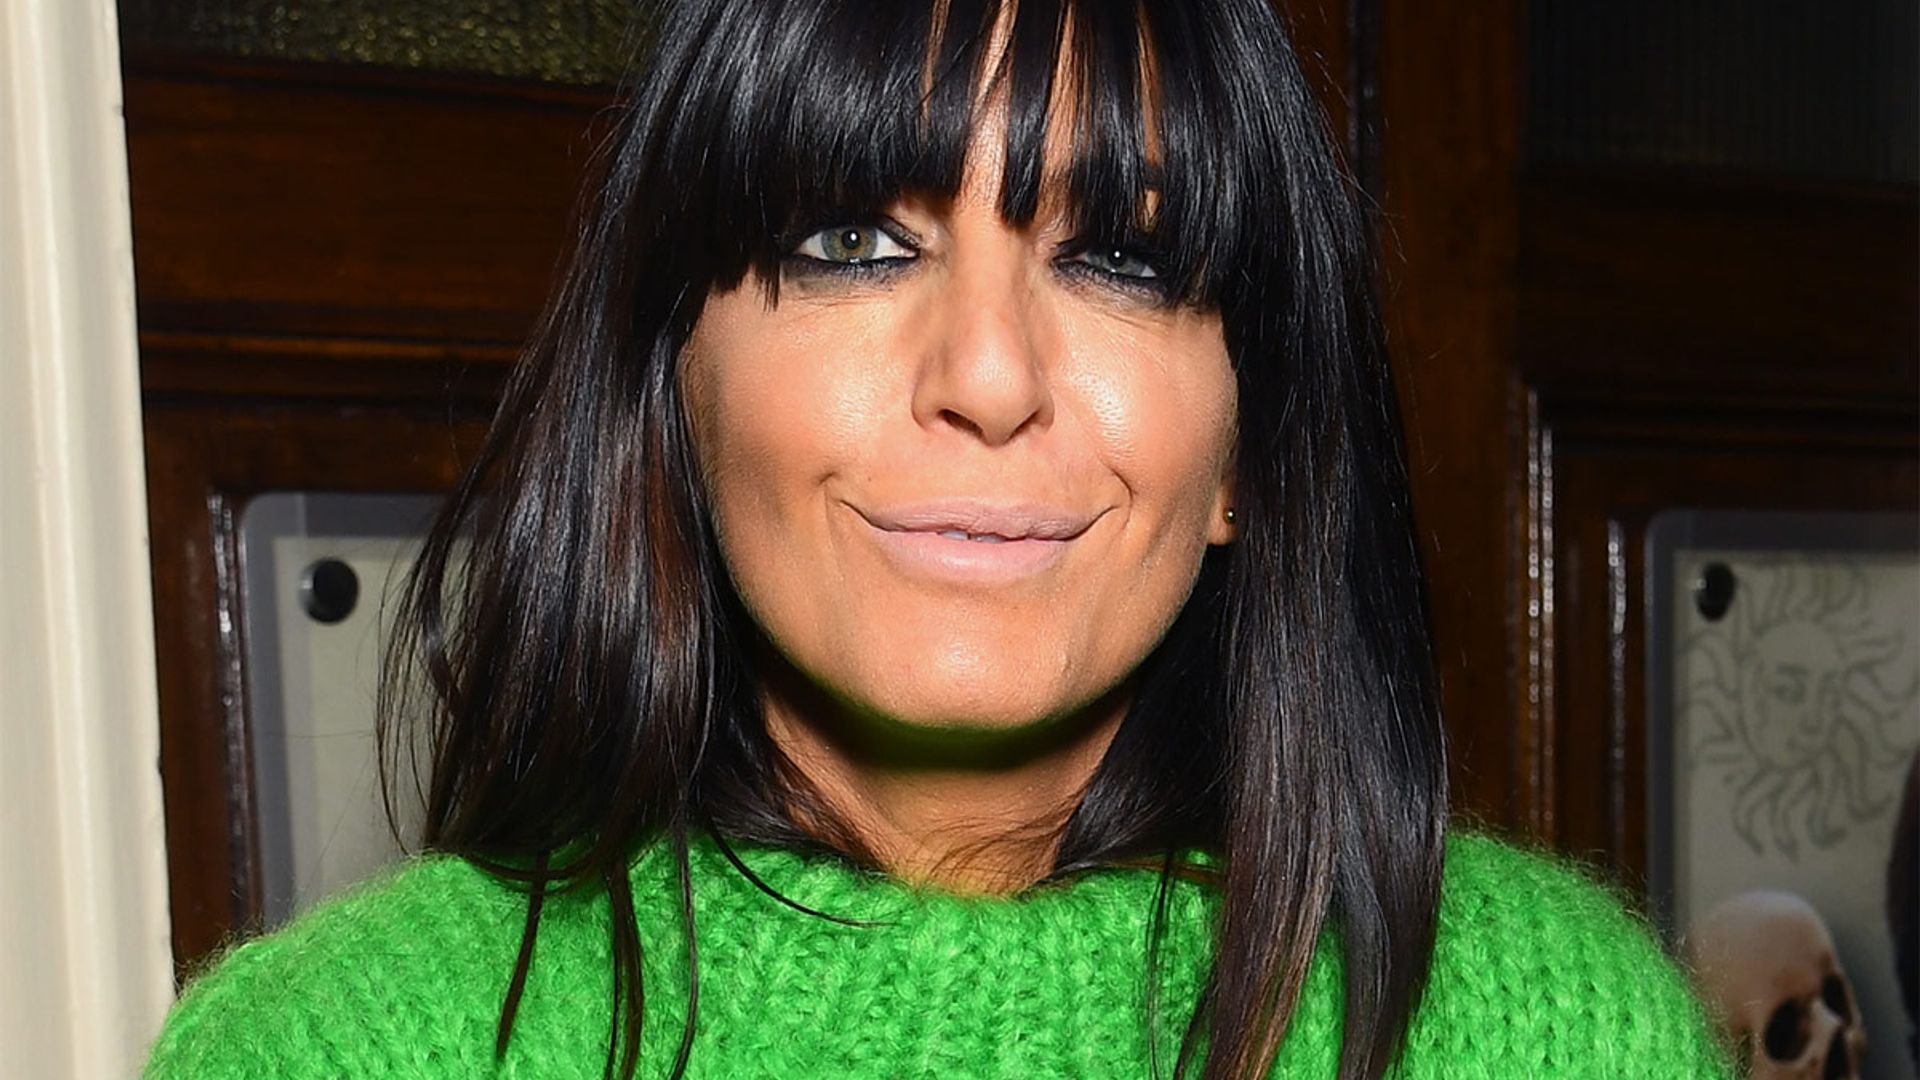 Claudia Winkleman wore Marks & Spencer on the Strictly results show